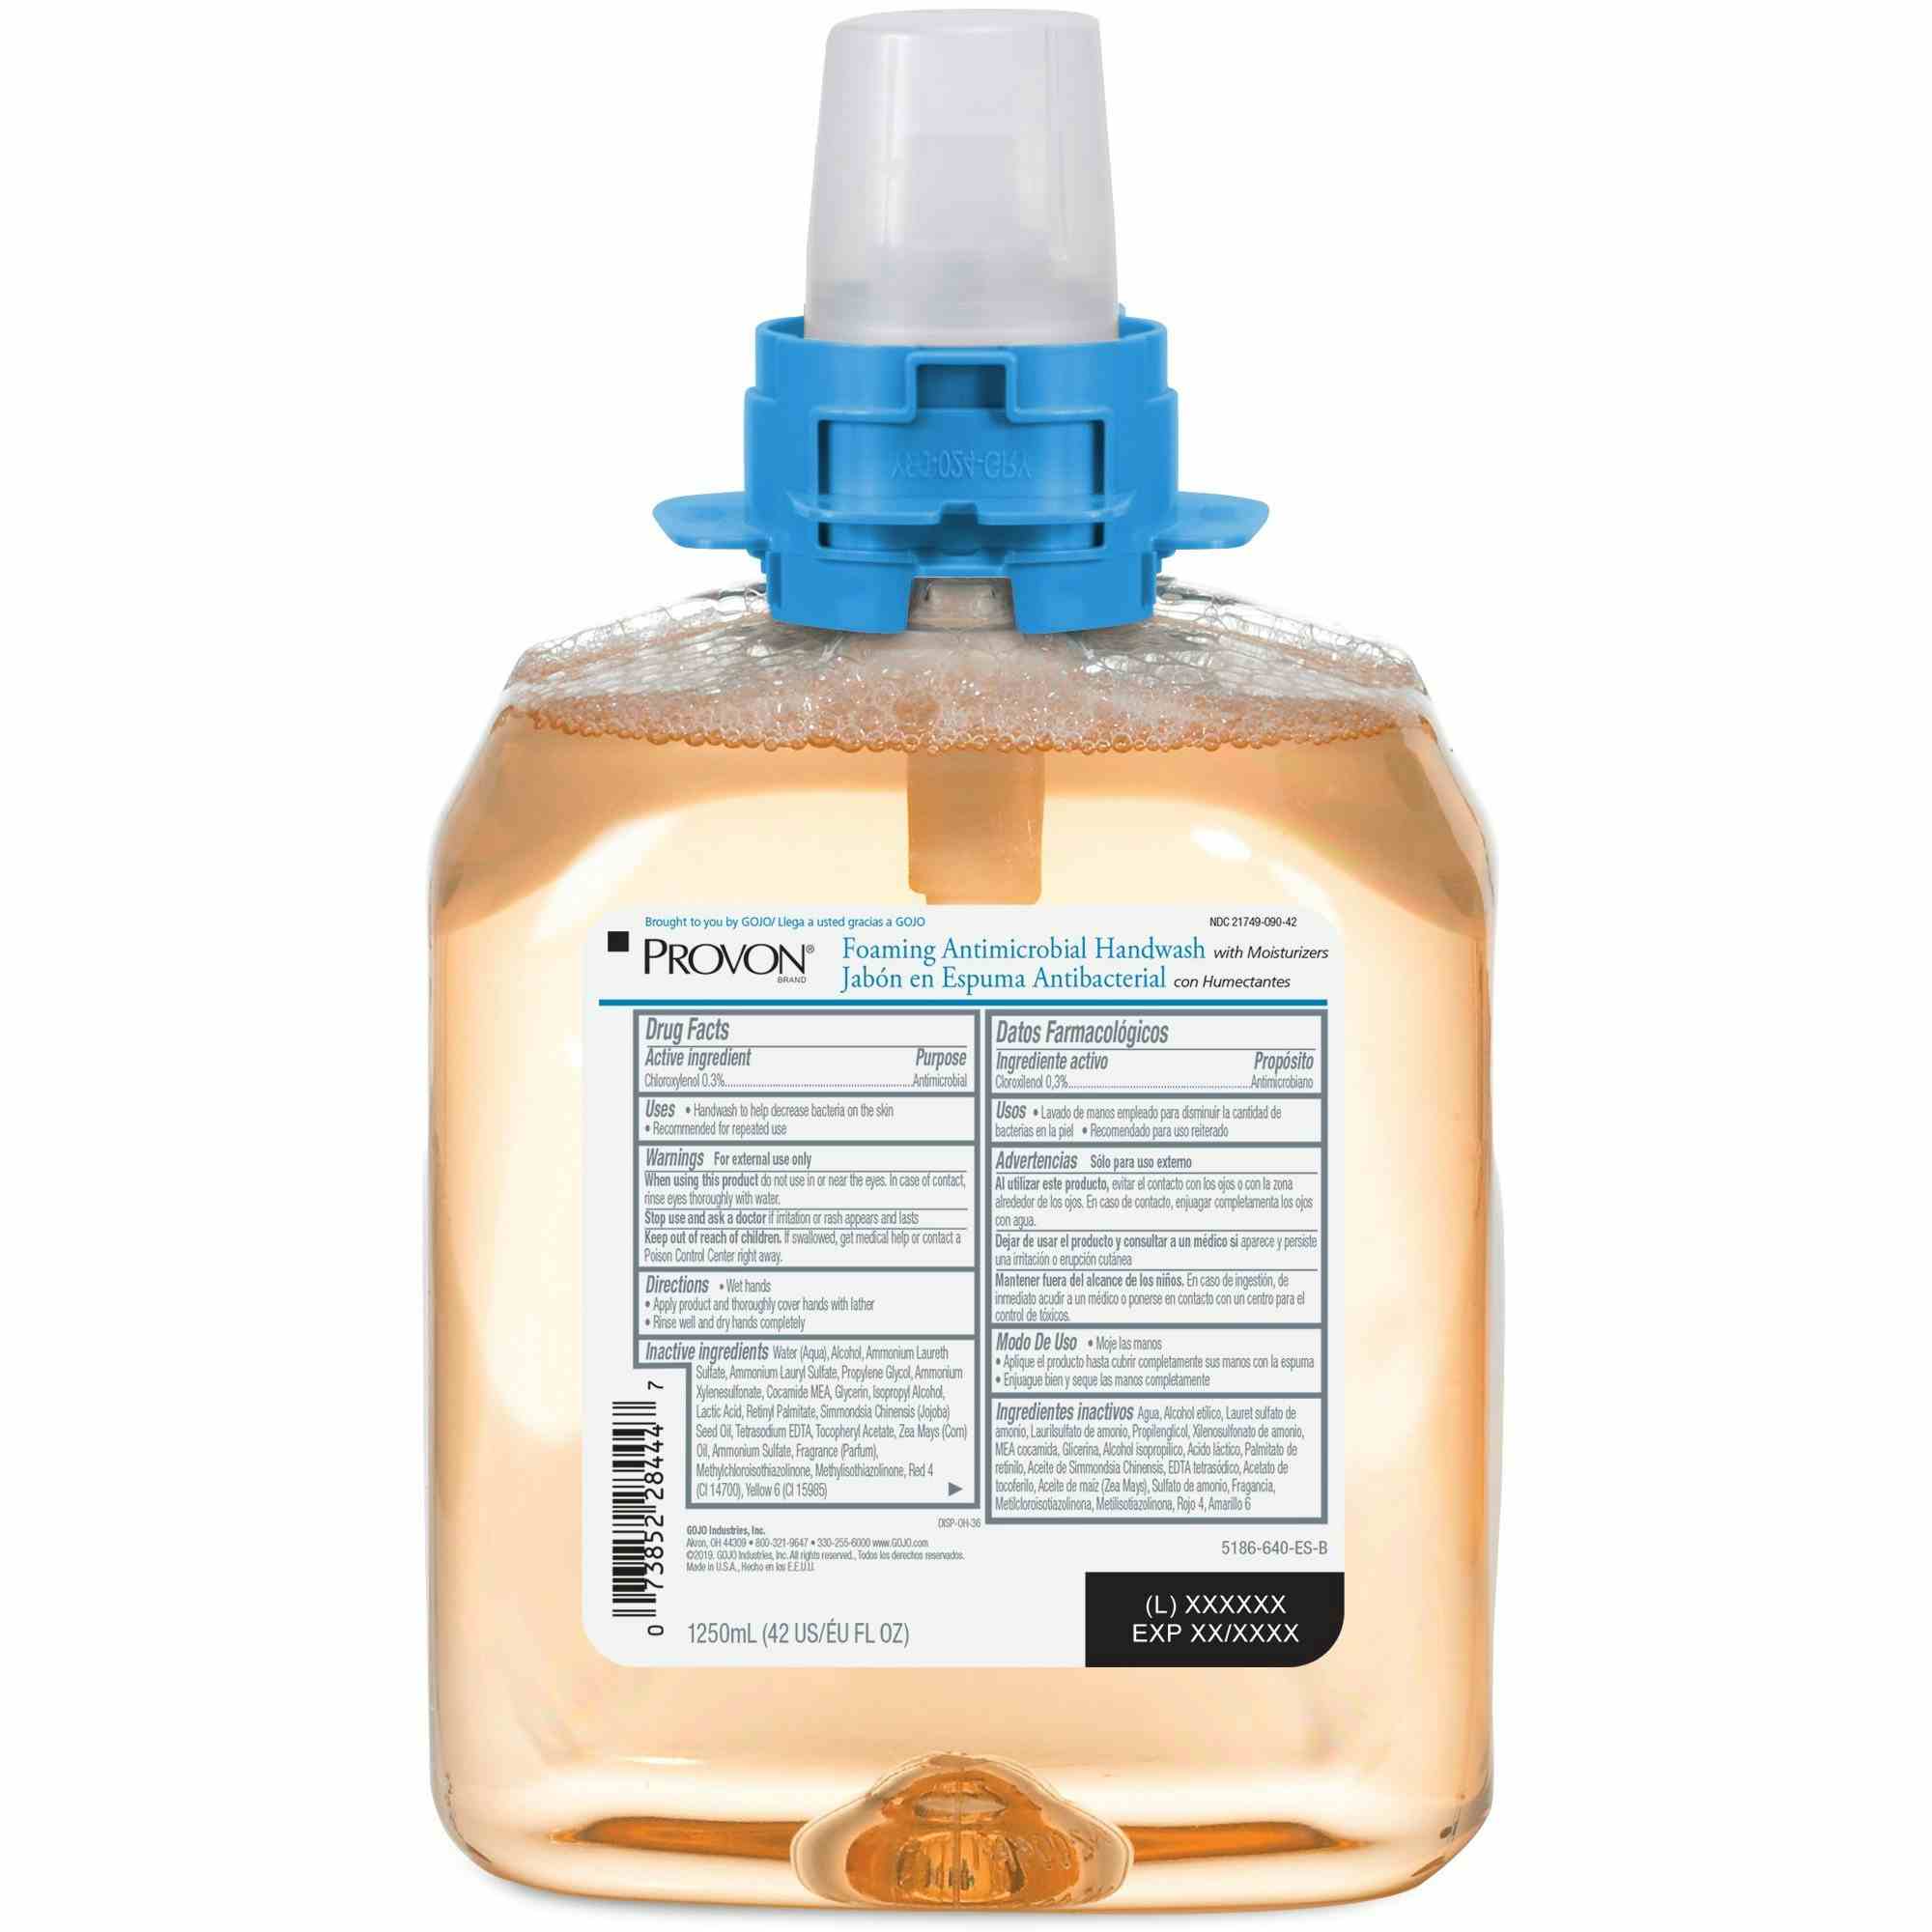 Provon Foaming Antimicrobial Soap Refill, Fruit Scent, 5186-04, 1,250 mL - 1 Each